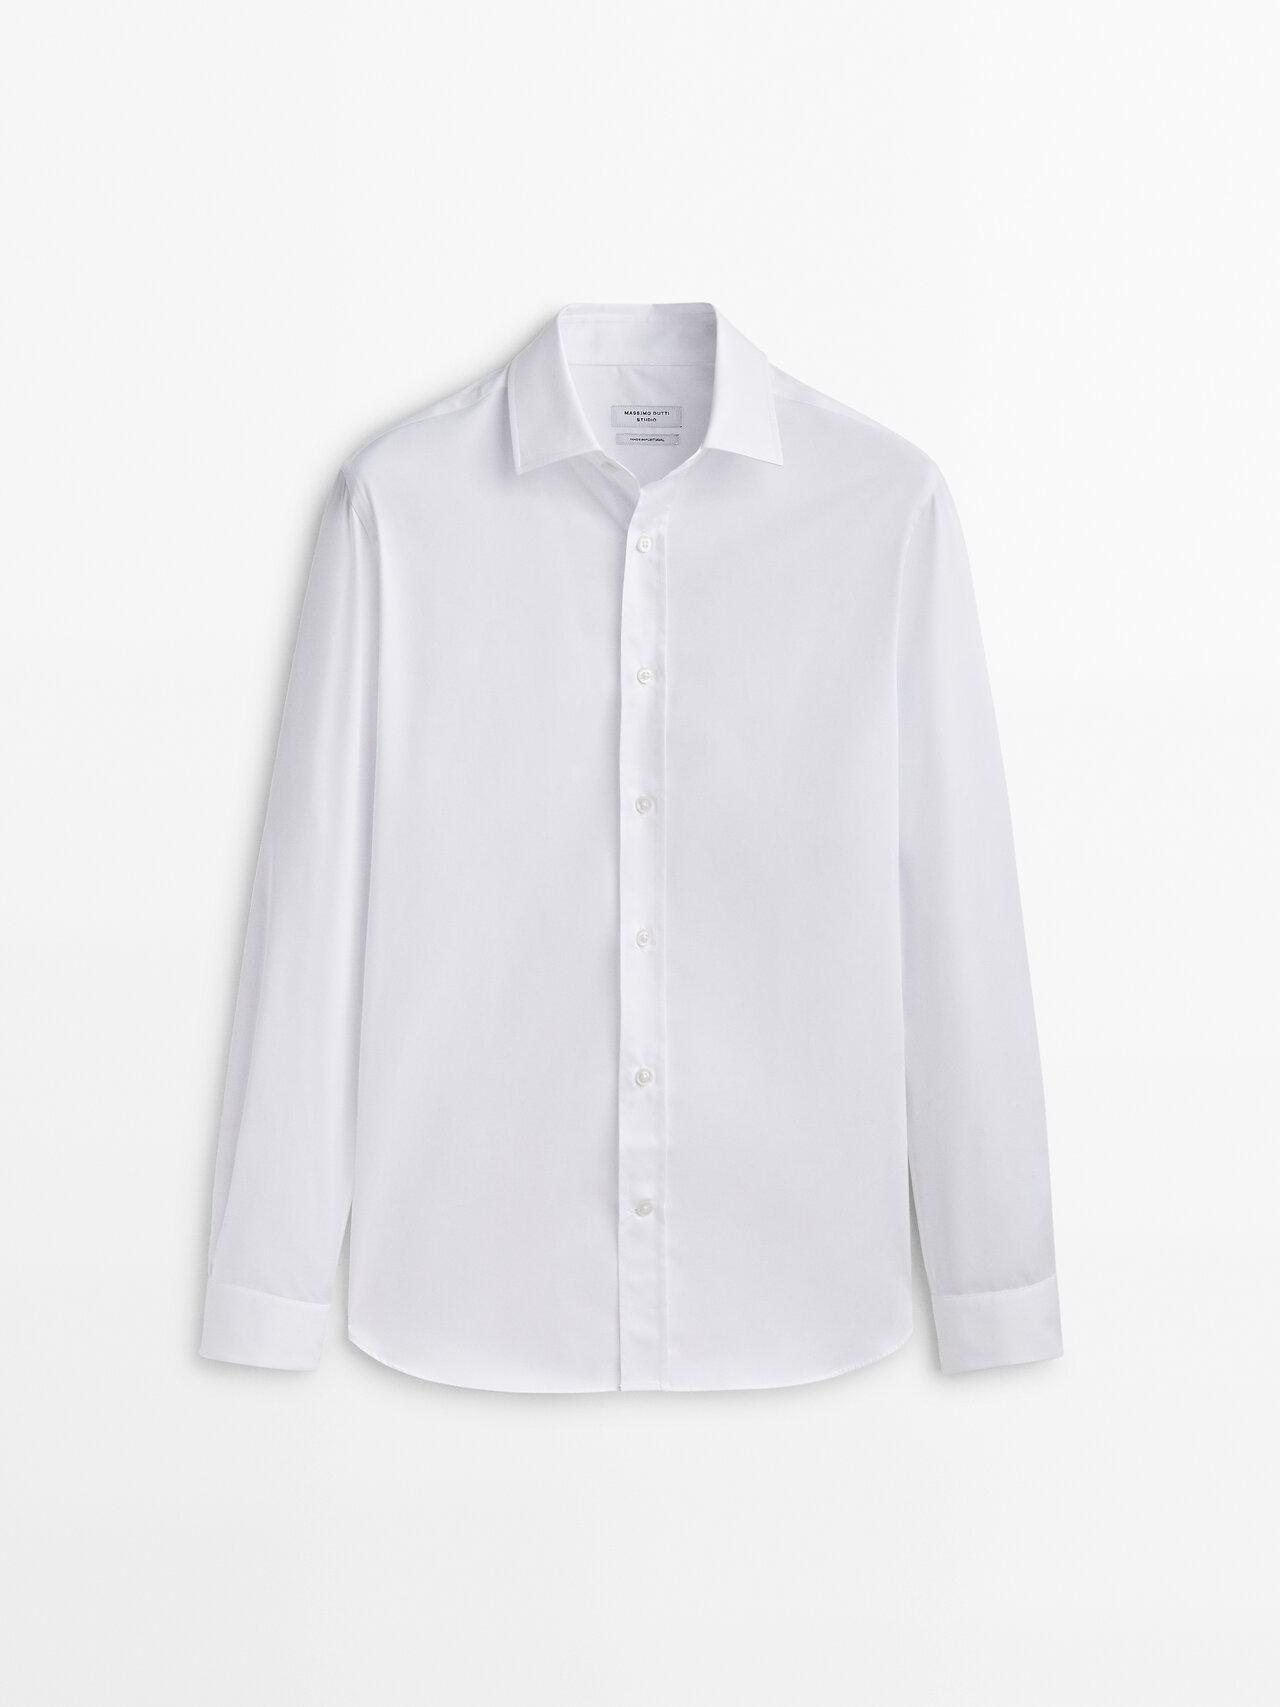 MASSIMO DUTTI Relaxed Fit Cotton Shirt - Studio in White for Men | Lyst